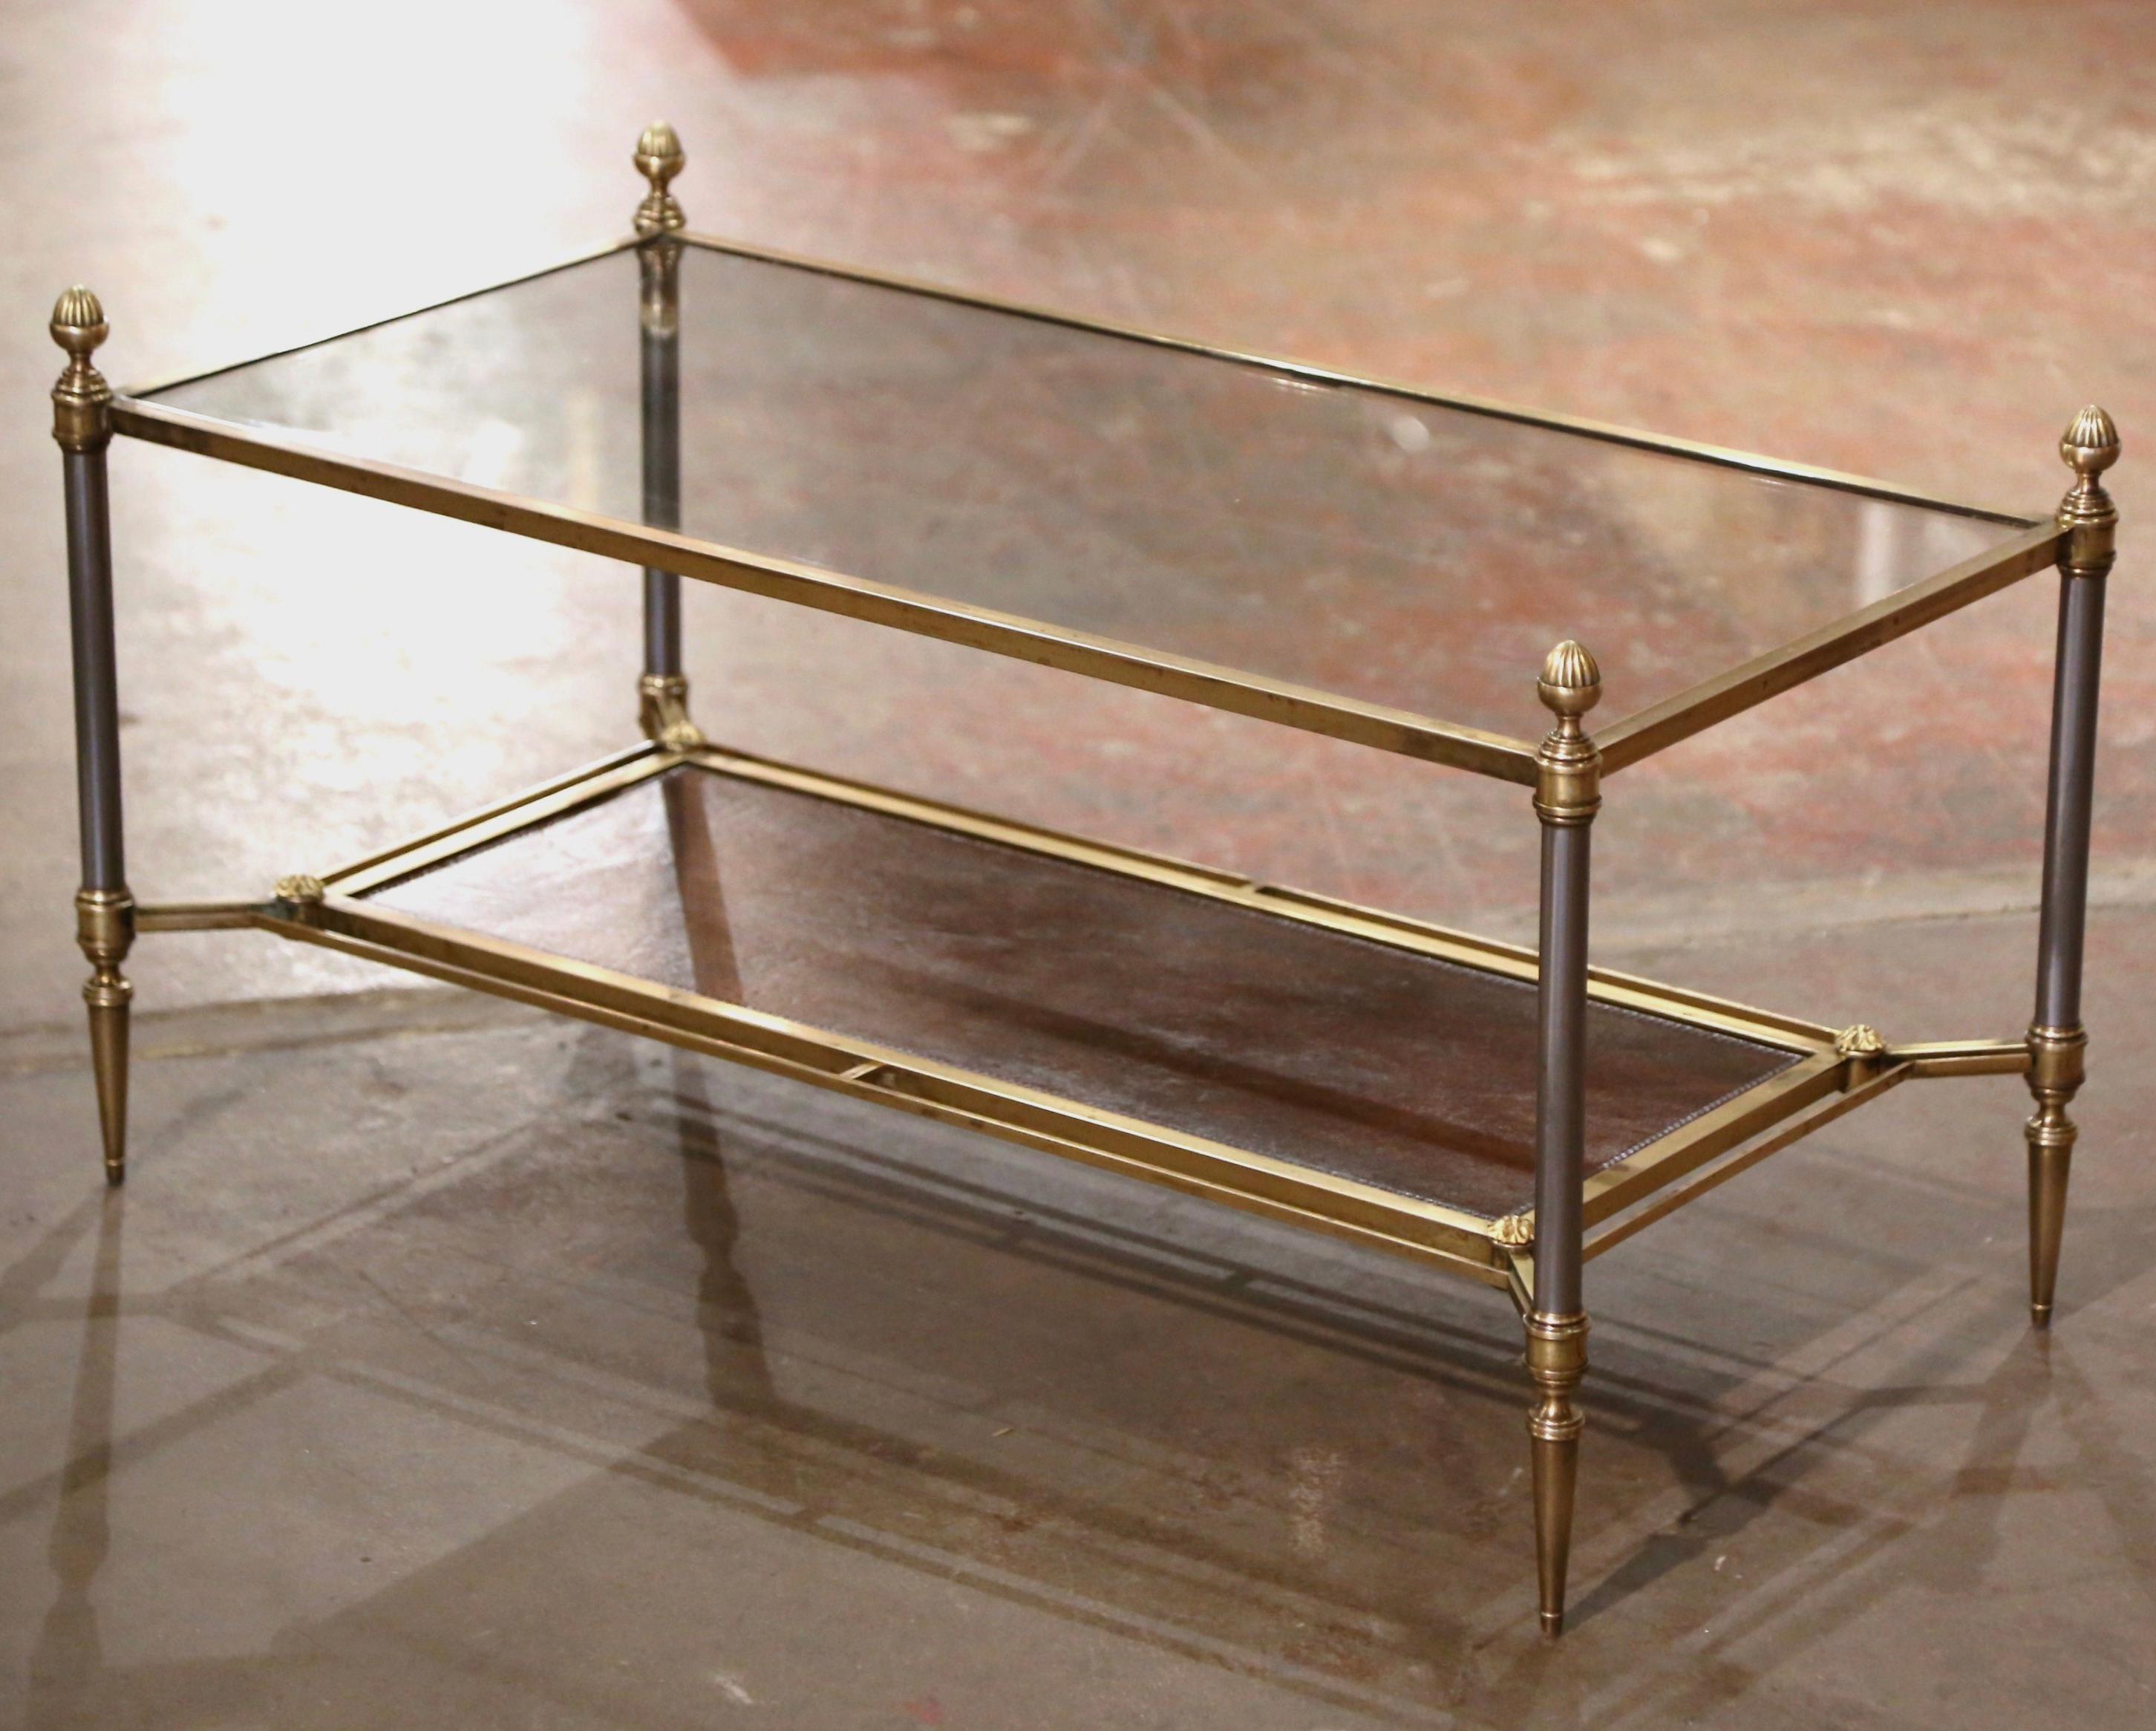 Decorate a living room or den with this elegant antique coffee table. Created in Paris, France, circa 1950 by Maison Jansen, the clean line frame is made of brushed steel, bronze and brass; it features round legs ending with tapered feet, and is